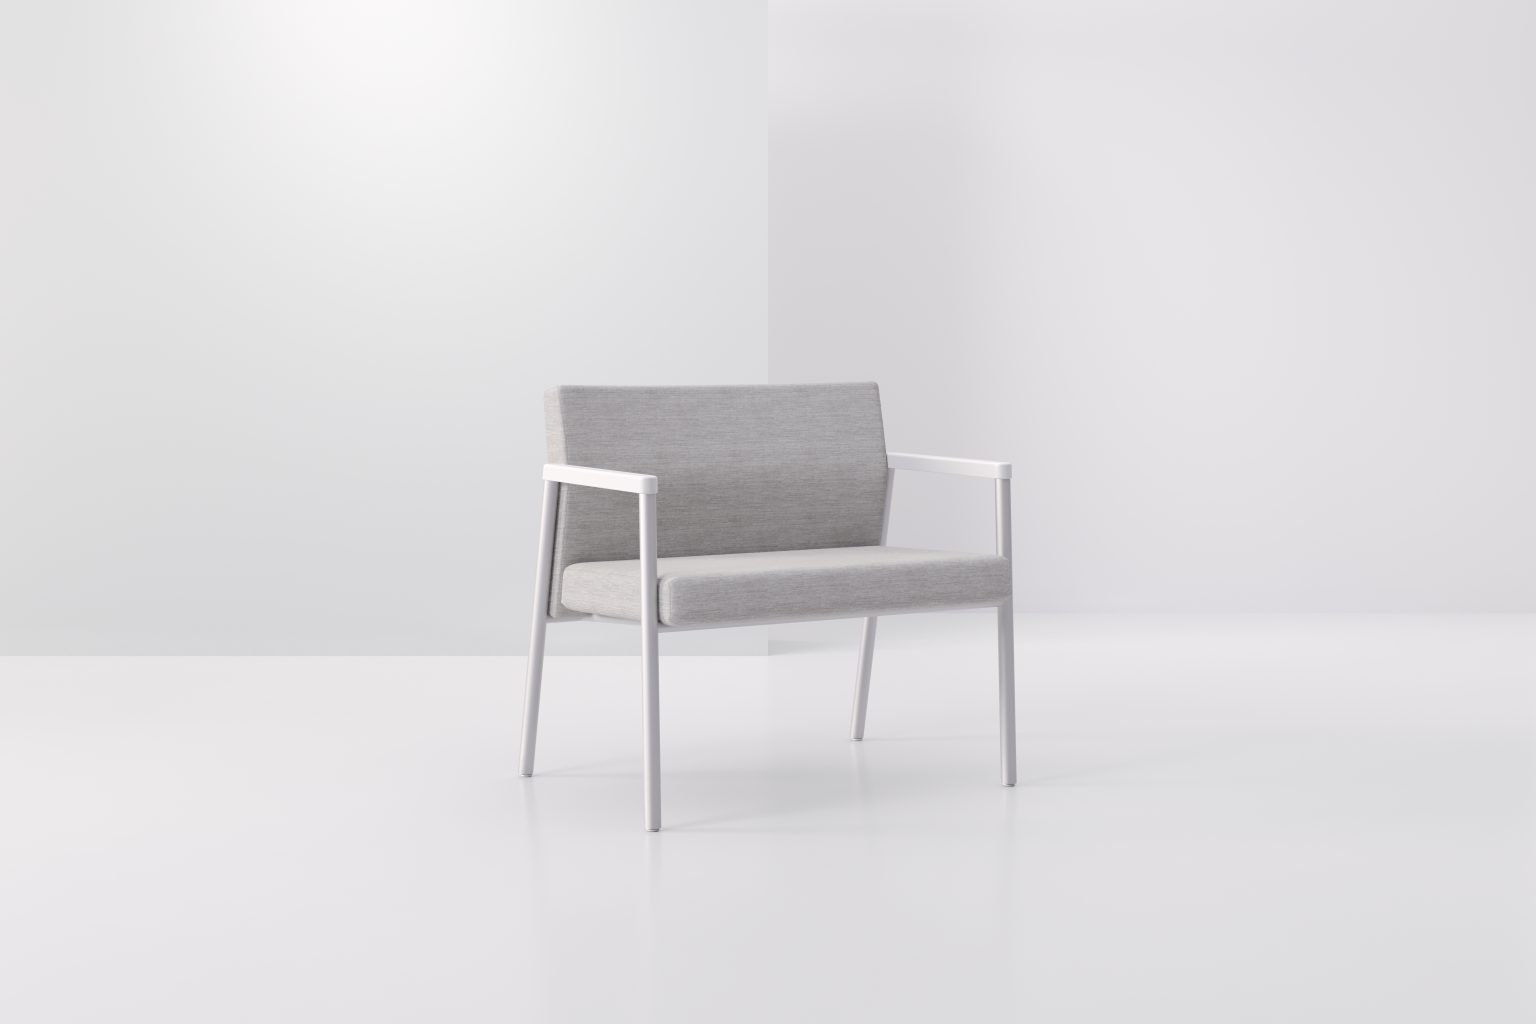 Altos 30 Chair Product Image 1